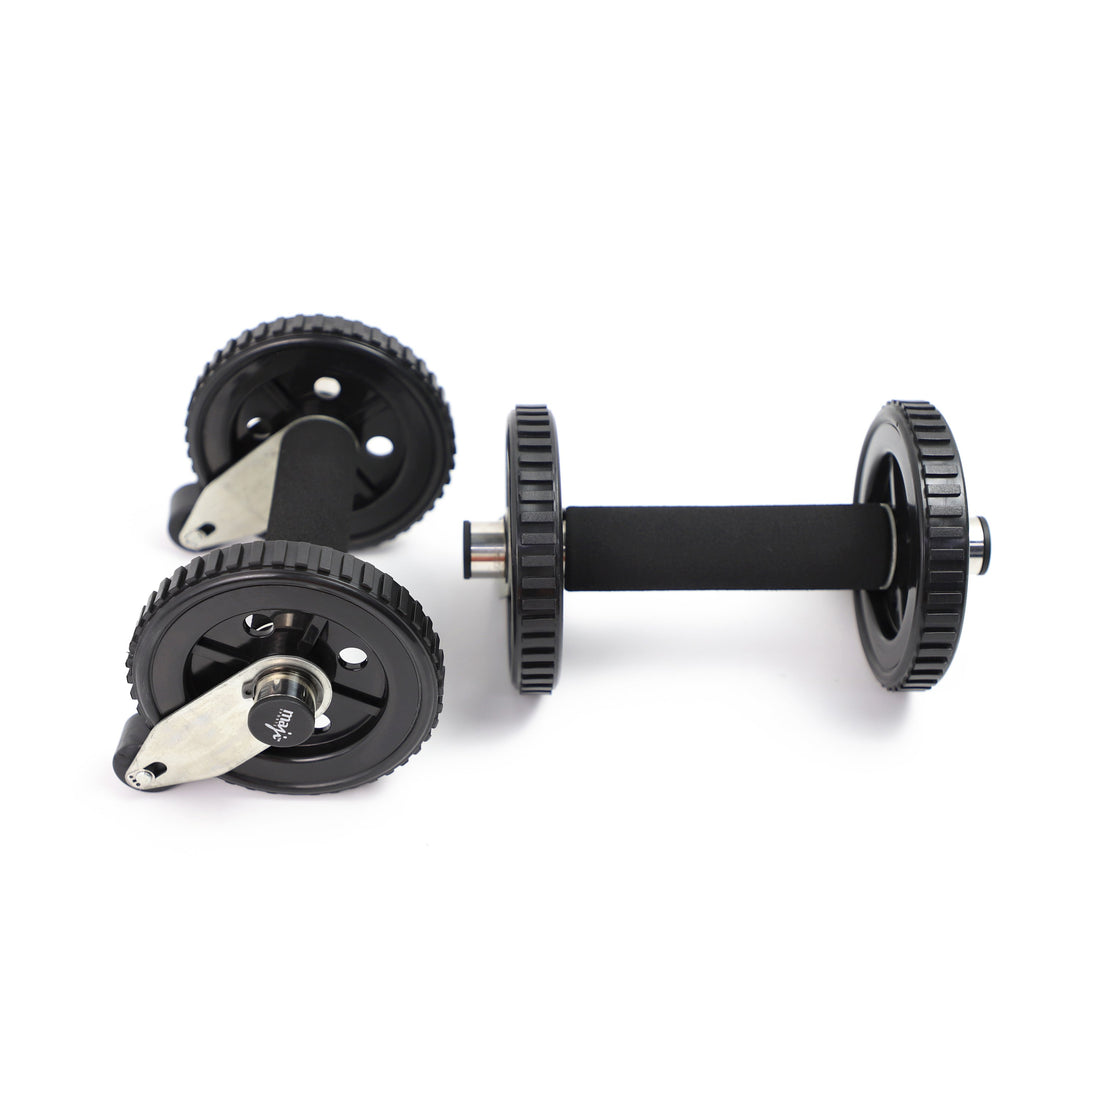 Multi-Functional Ab Rollers For Home Gym - Indicart